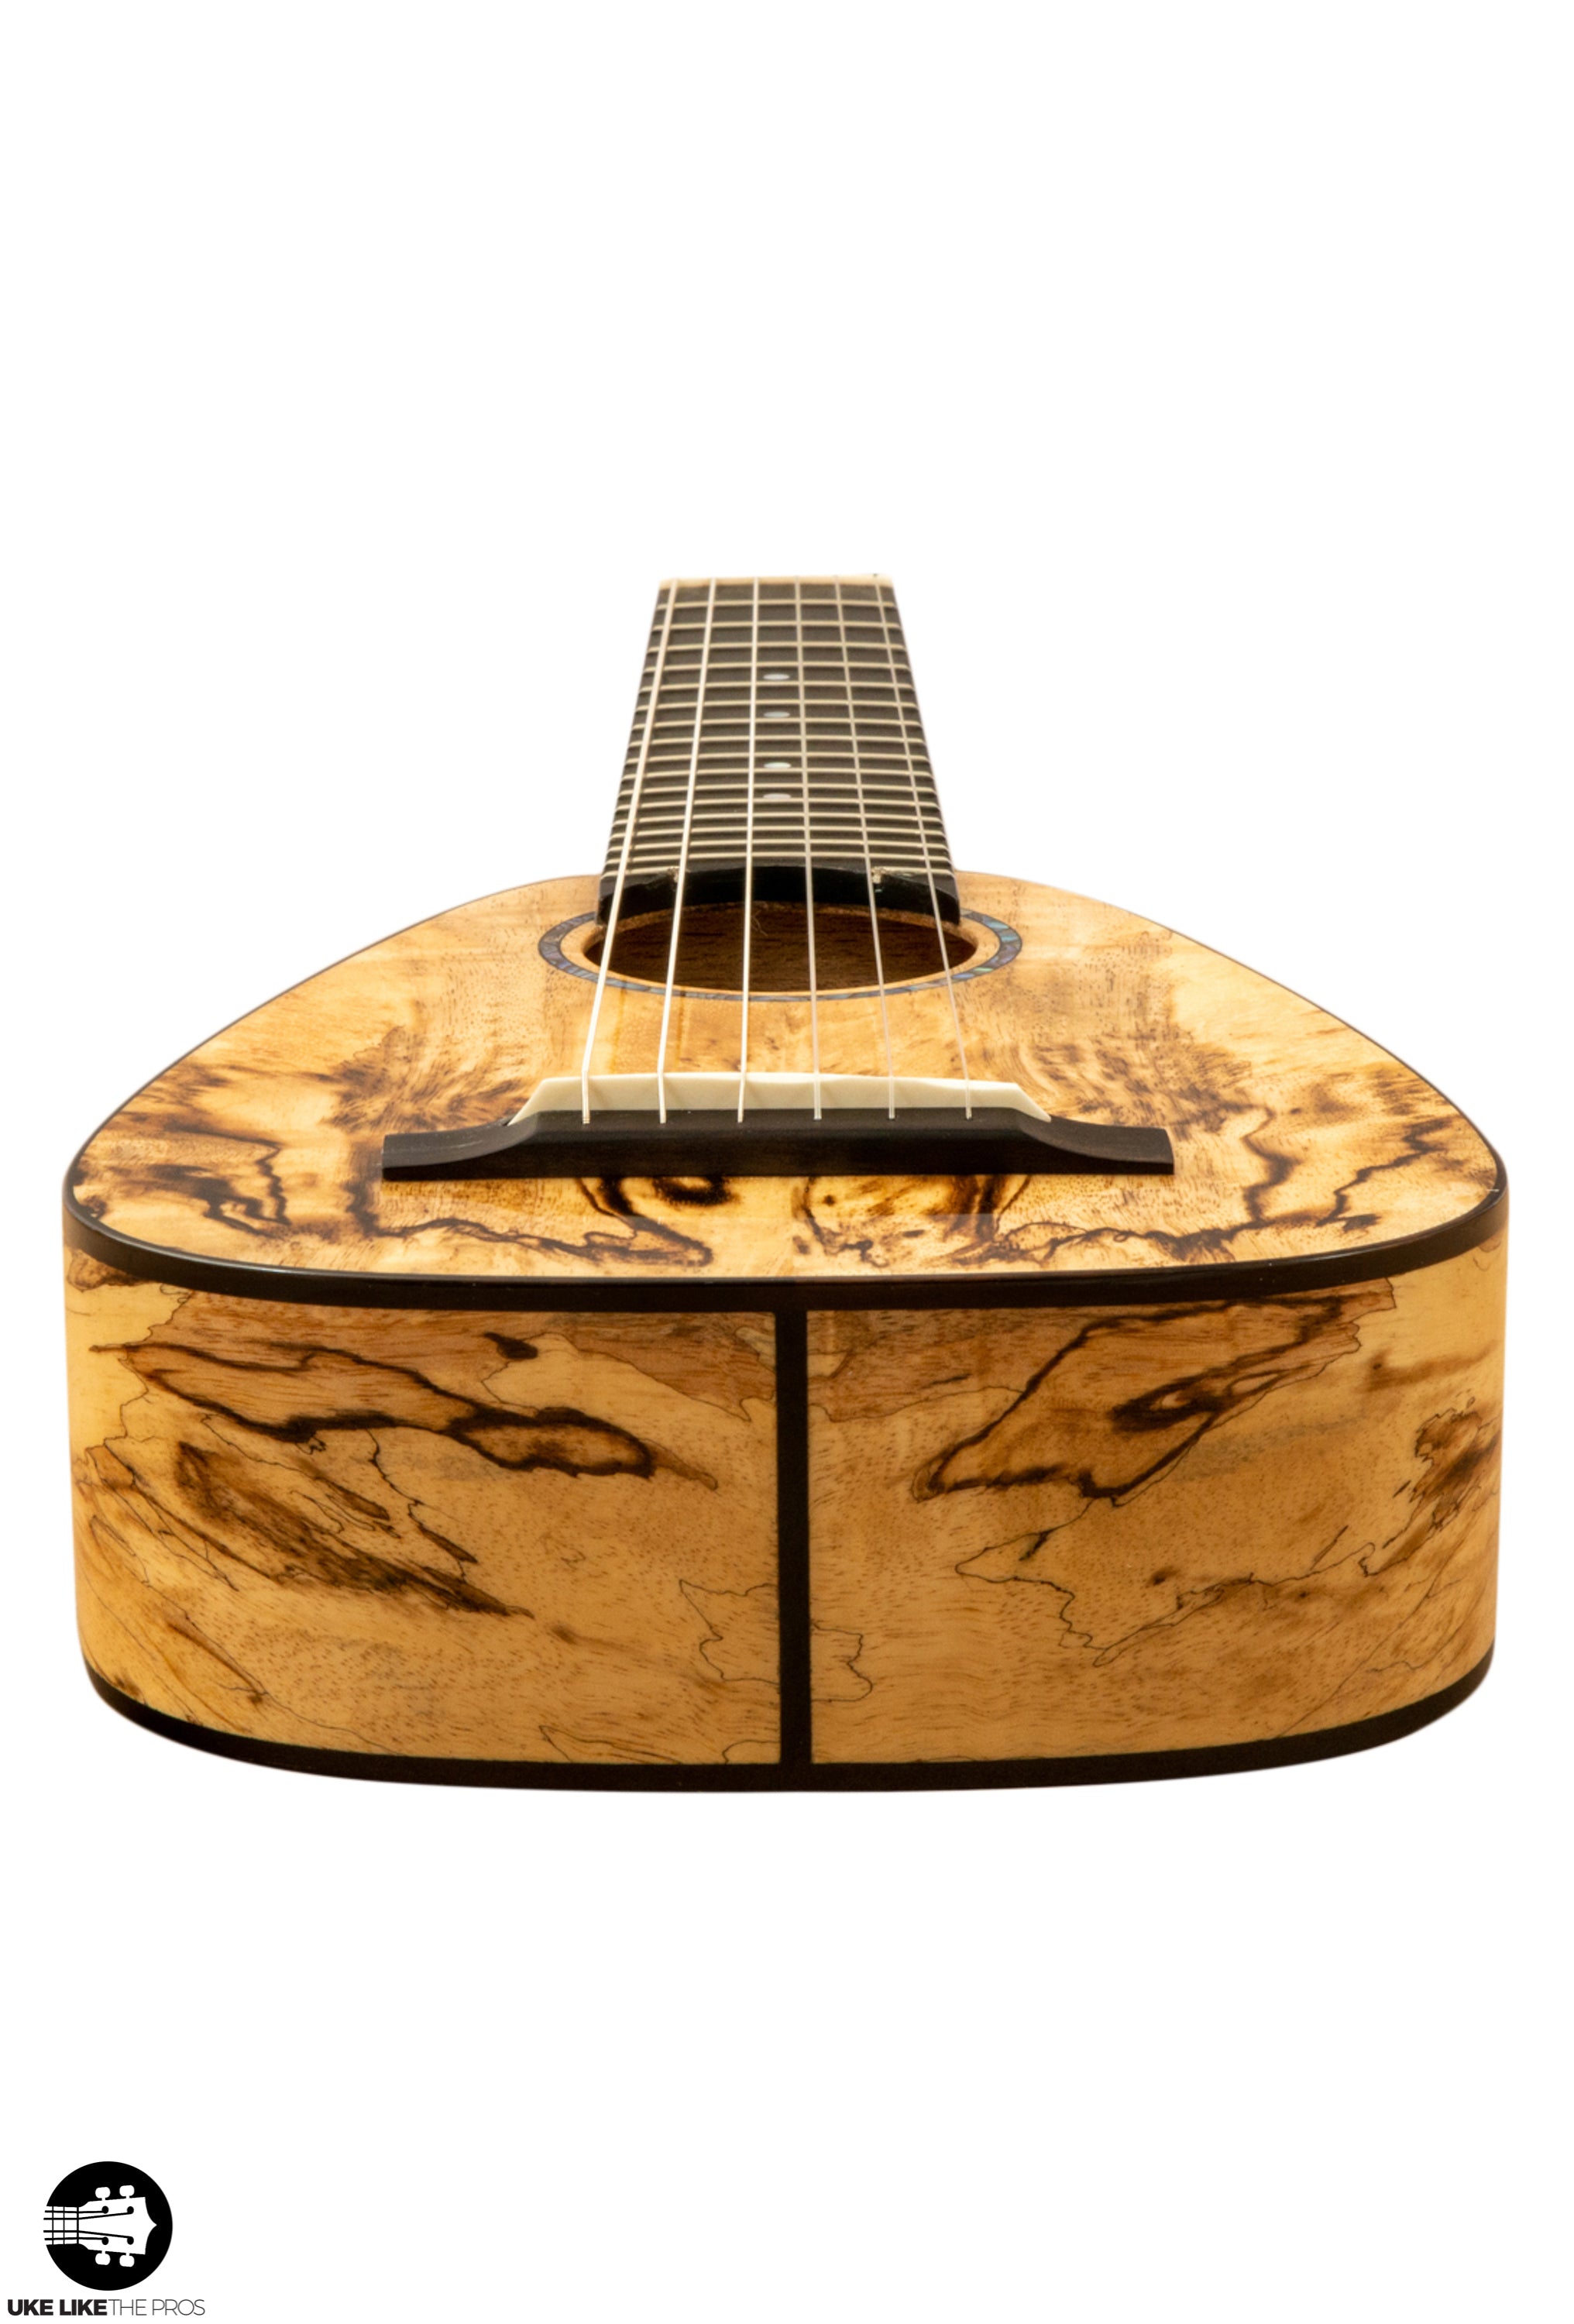 Romero Creations RC-TT6-MG 6 String Guilele Spalted Mango "Oxford" Tuned A to A